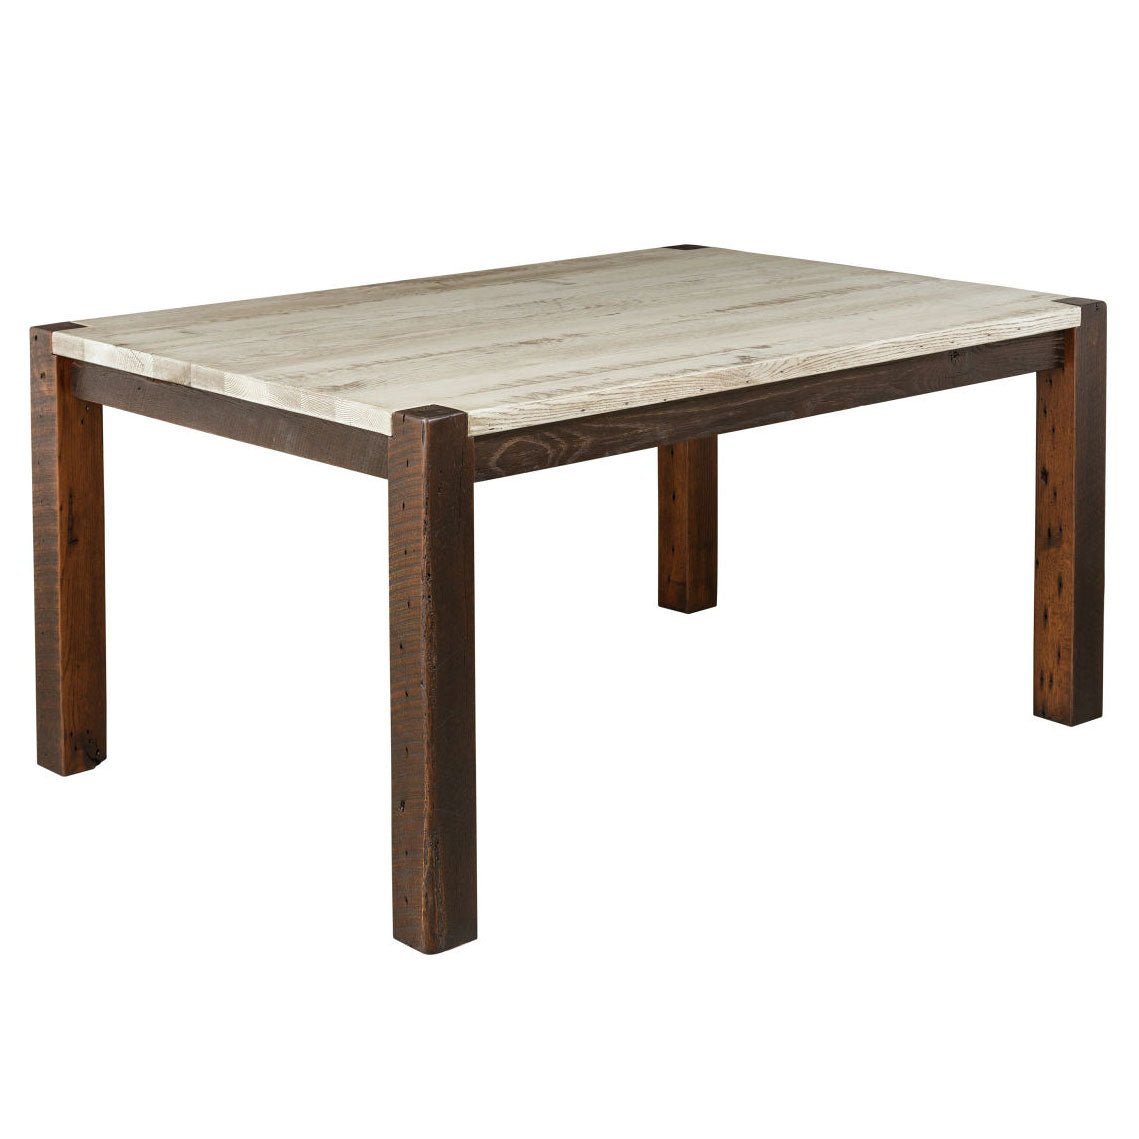 Amish Bedford Rustic Leg Dining Table Set - snyders.furniture